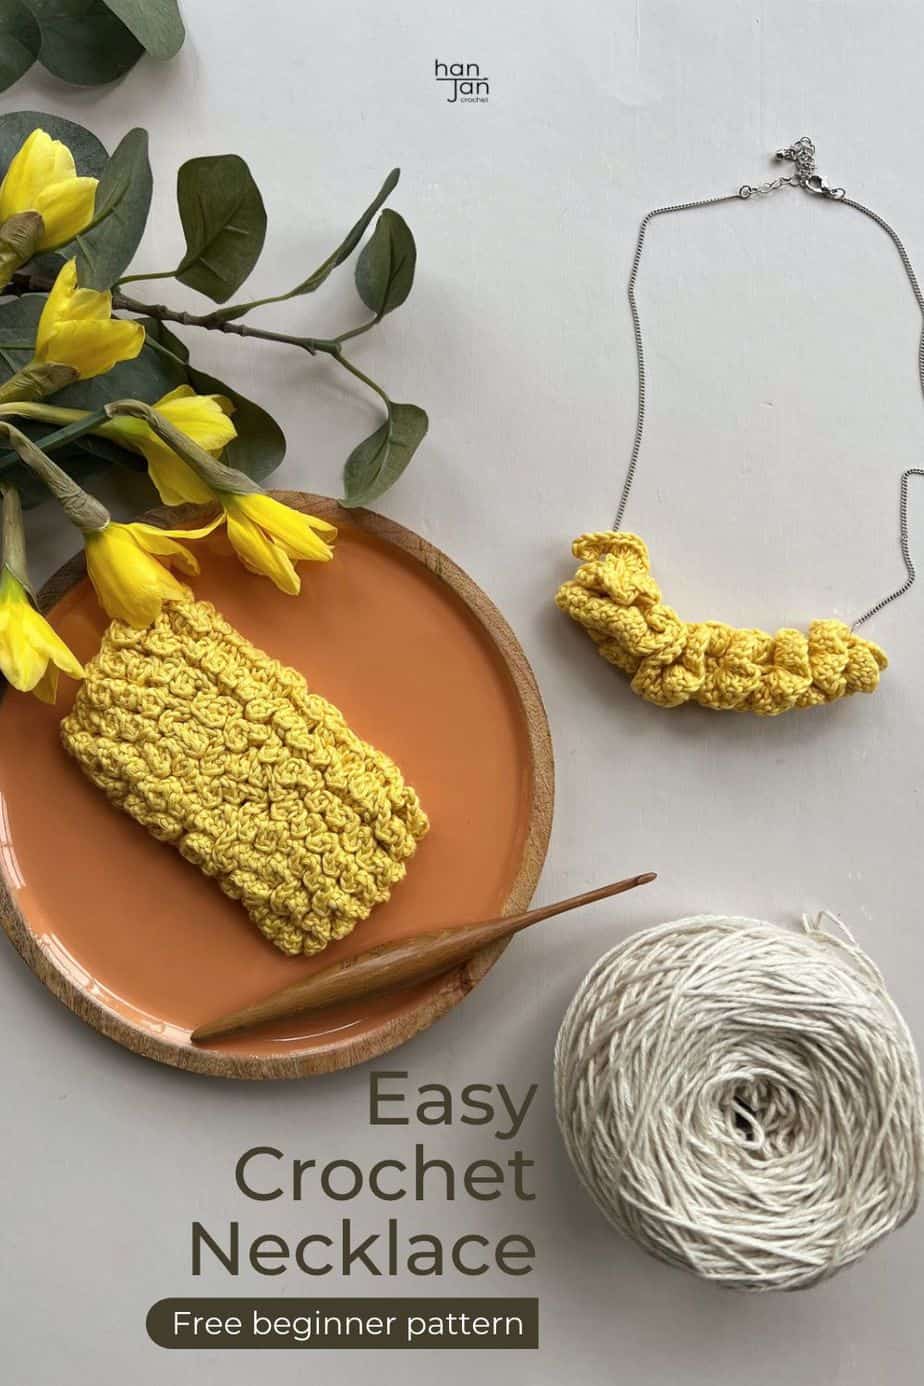 crochet necklace using ruffle stitch with cream yarn cake, wooden crochet hook and daffodils on table